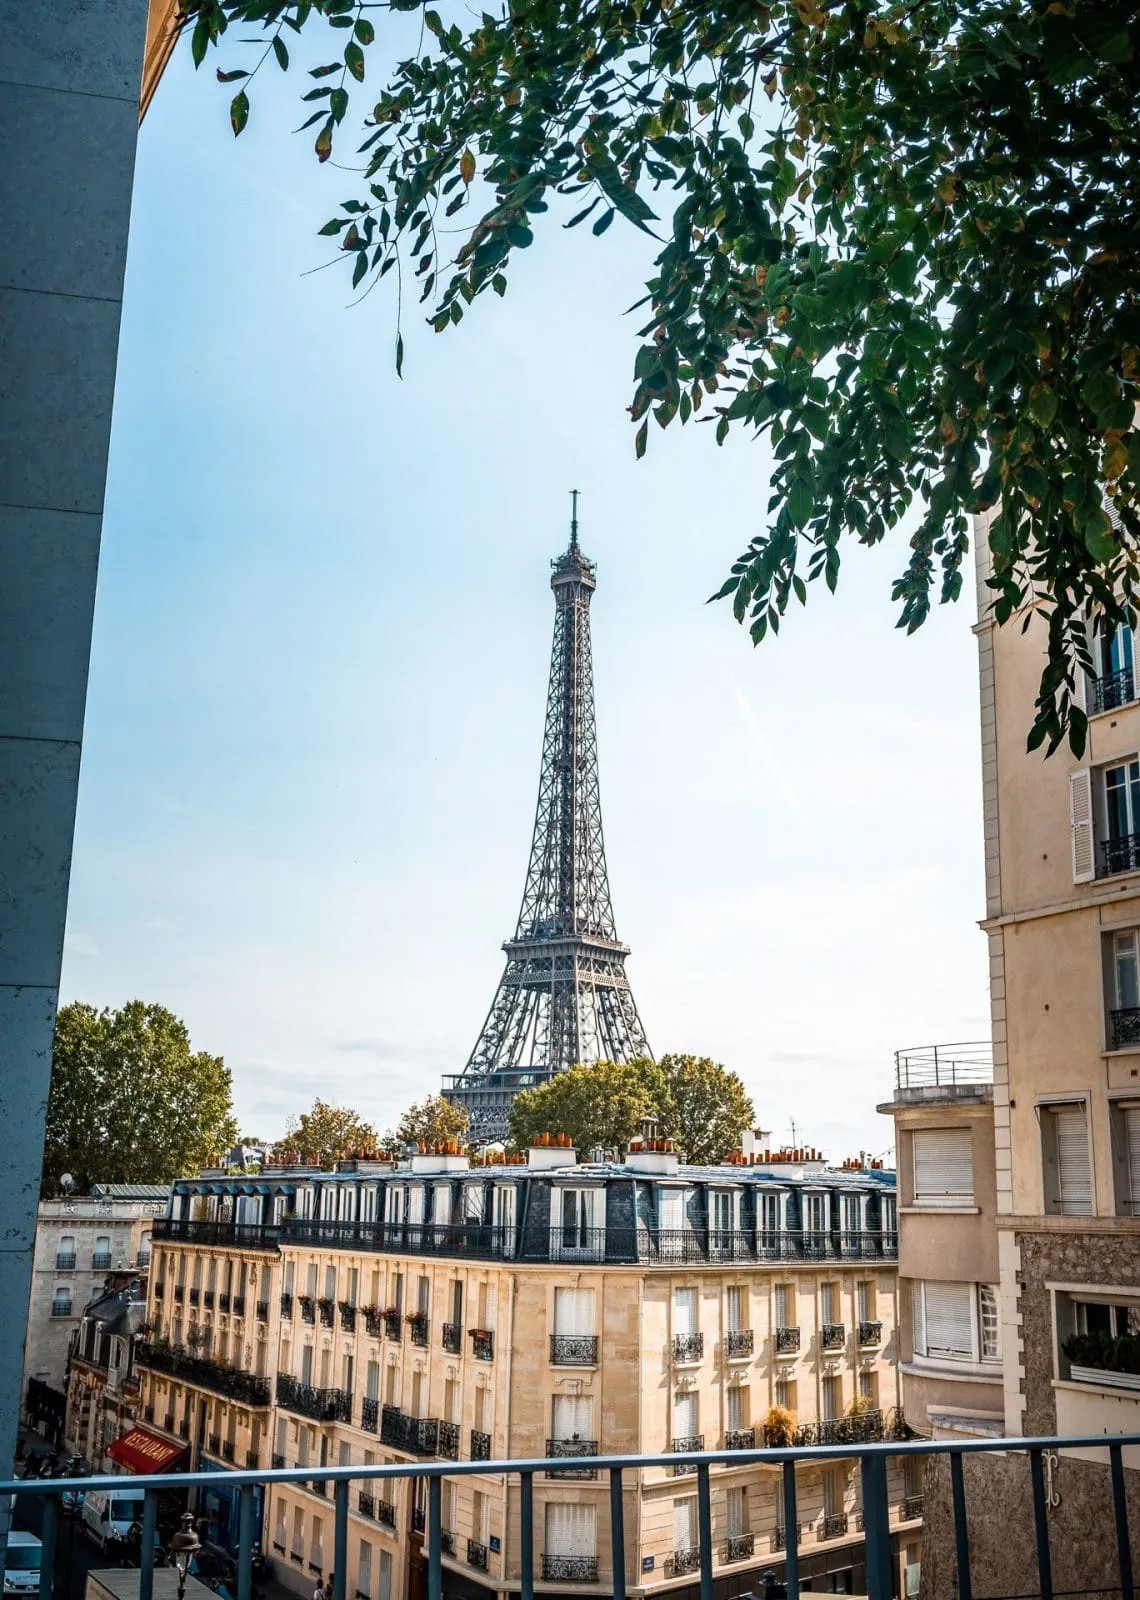 10 best hotels with an Eiffel Tower view in 2023 